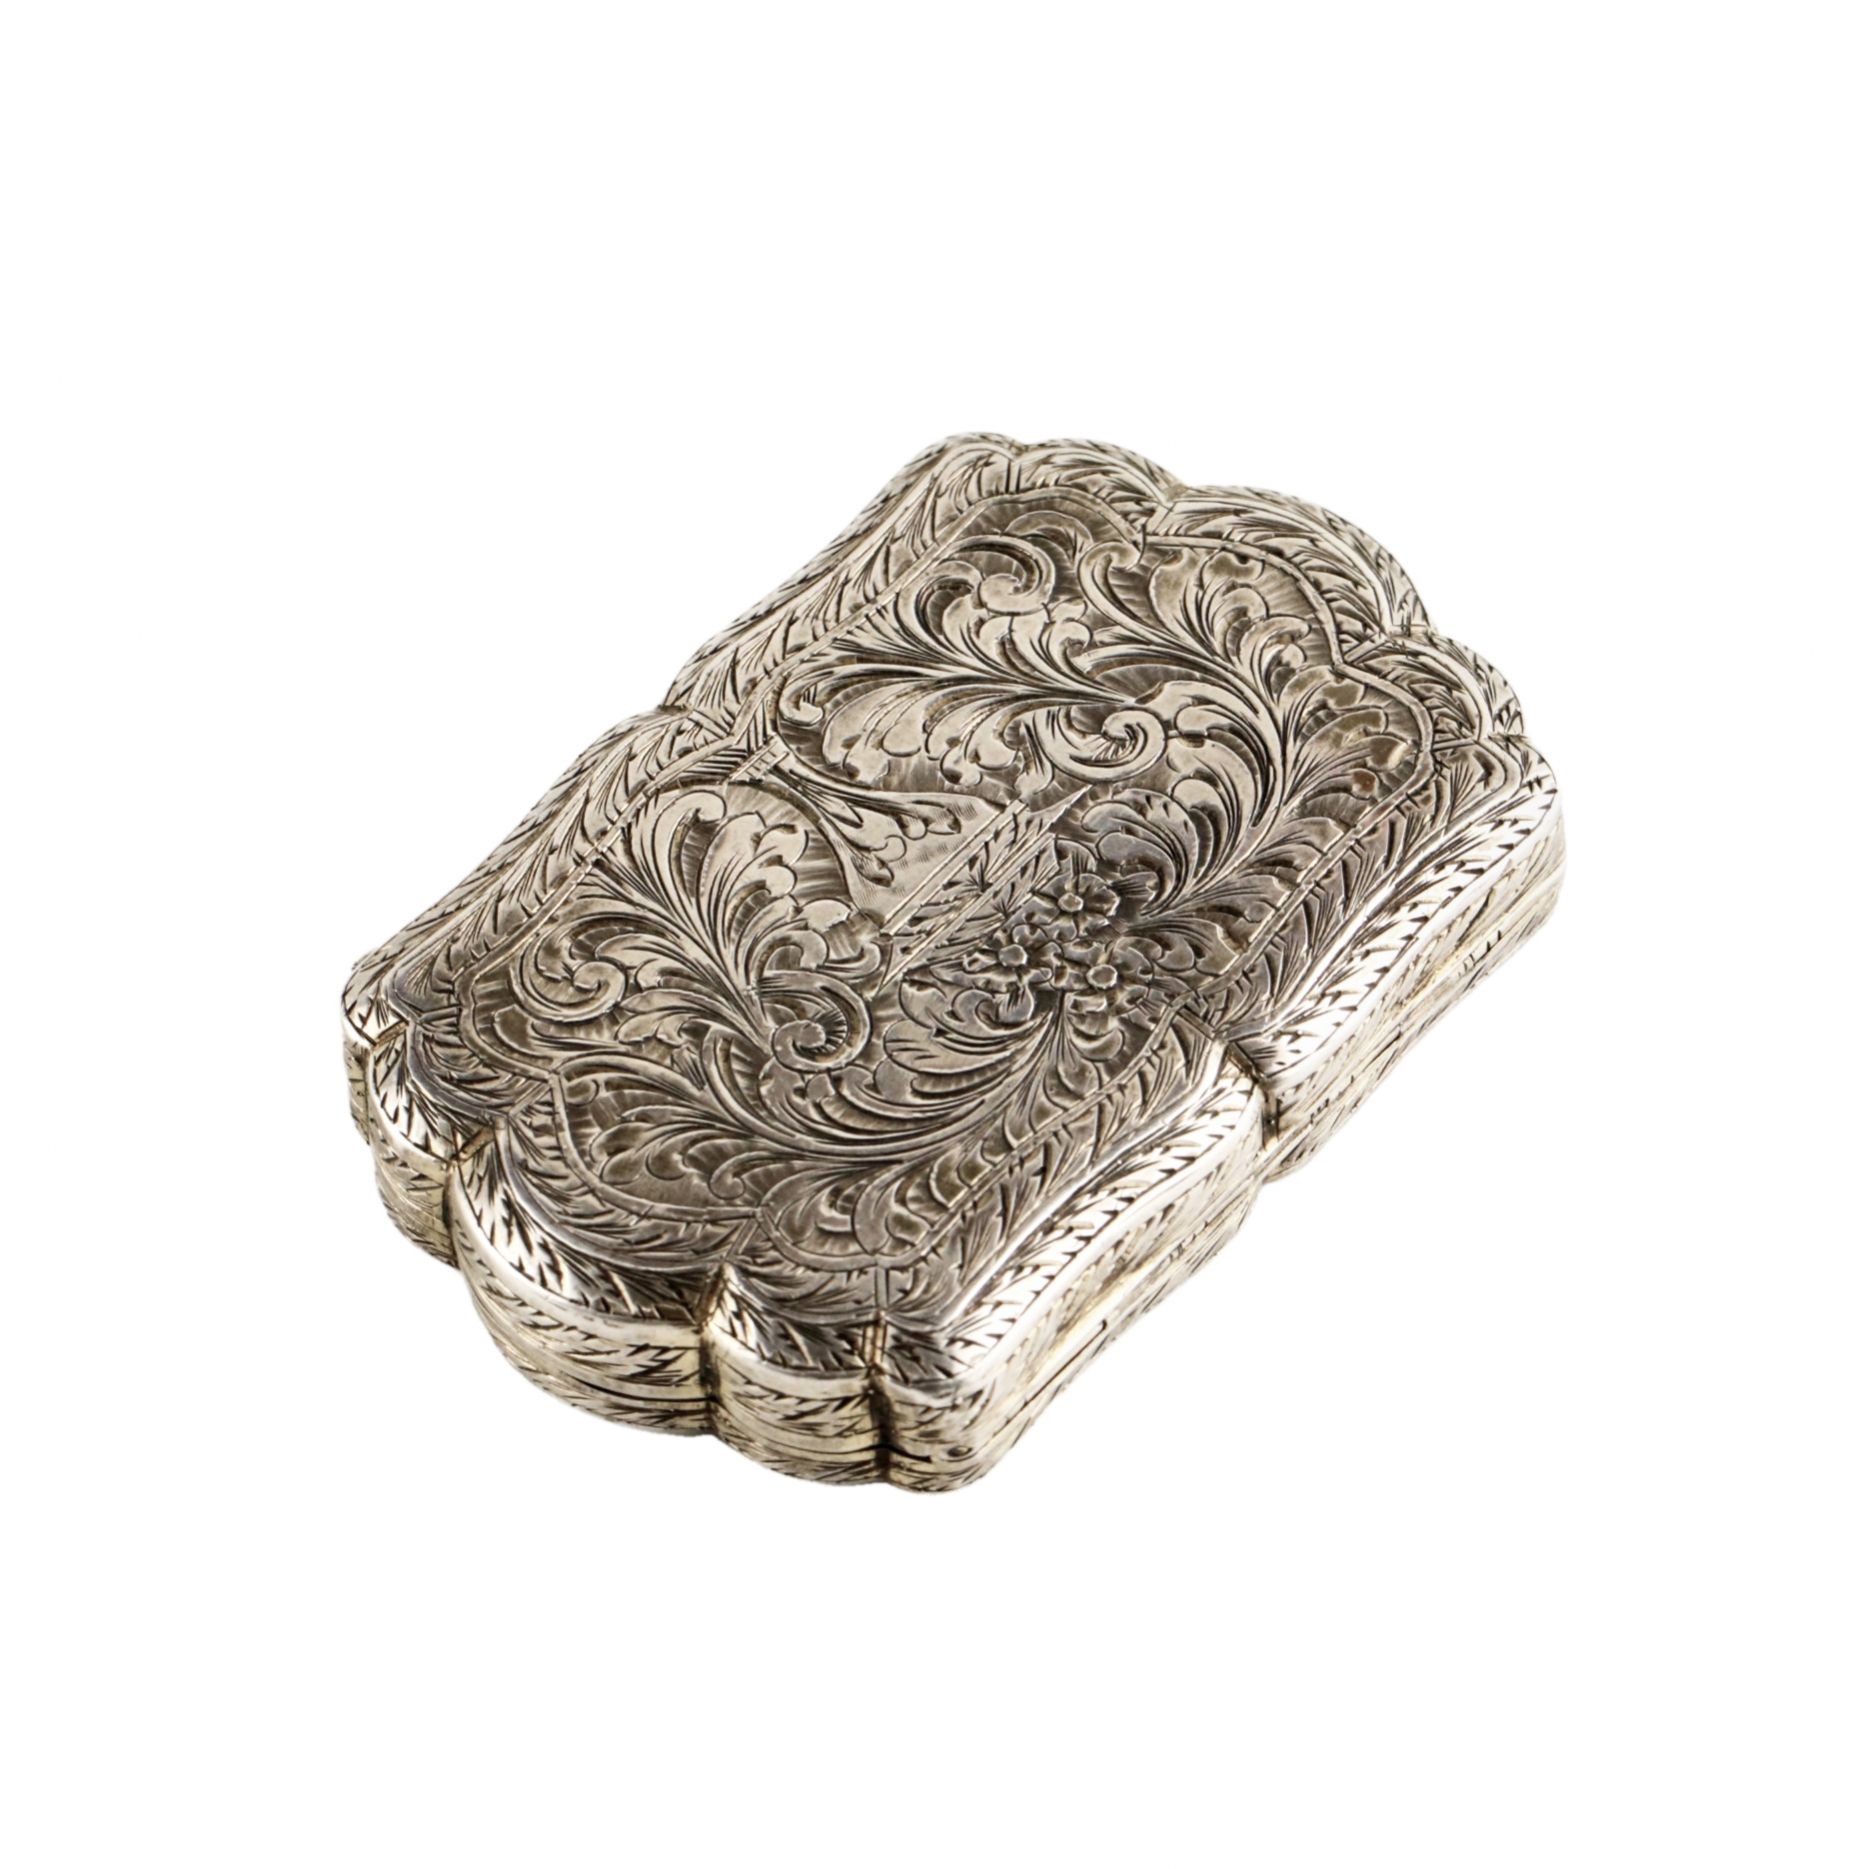 Silver snuffbox. - Image 6 of 9